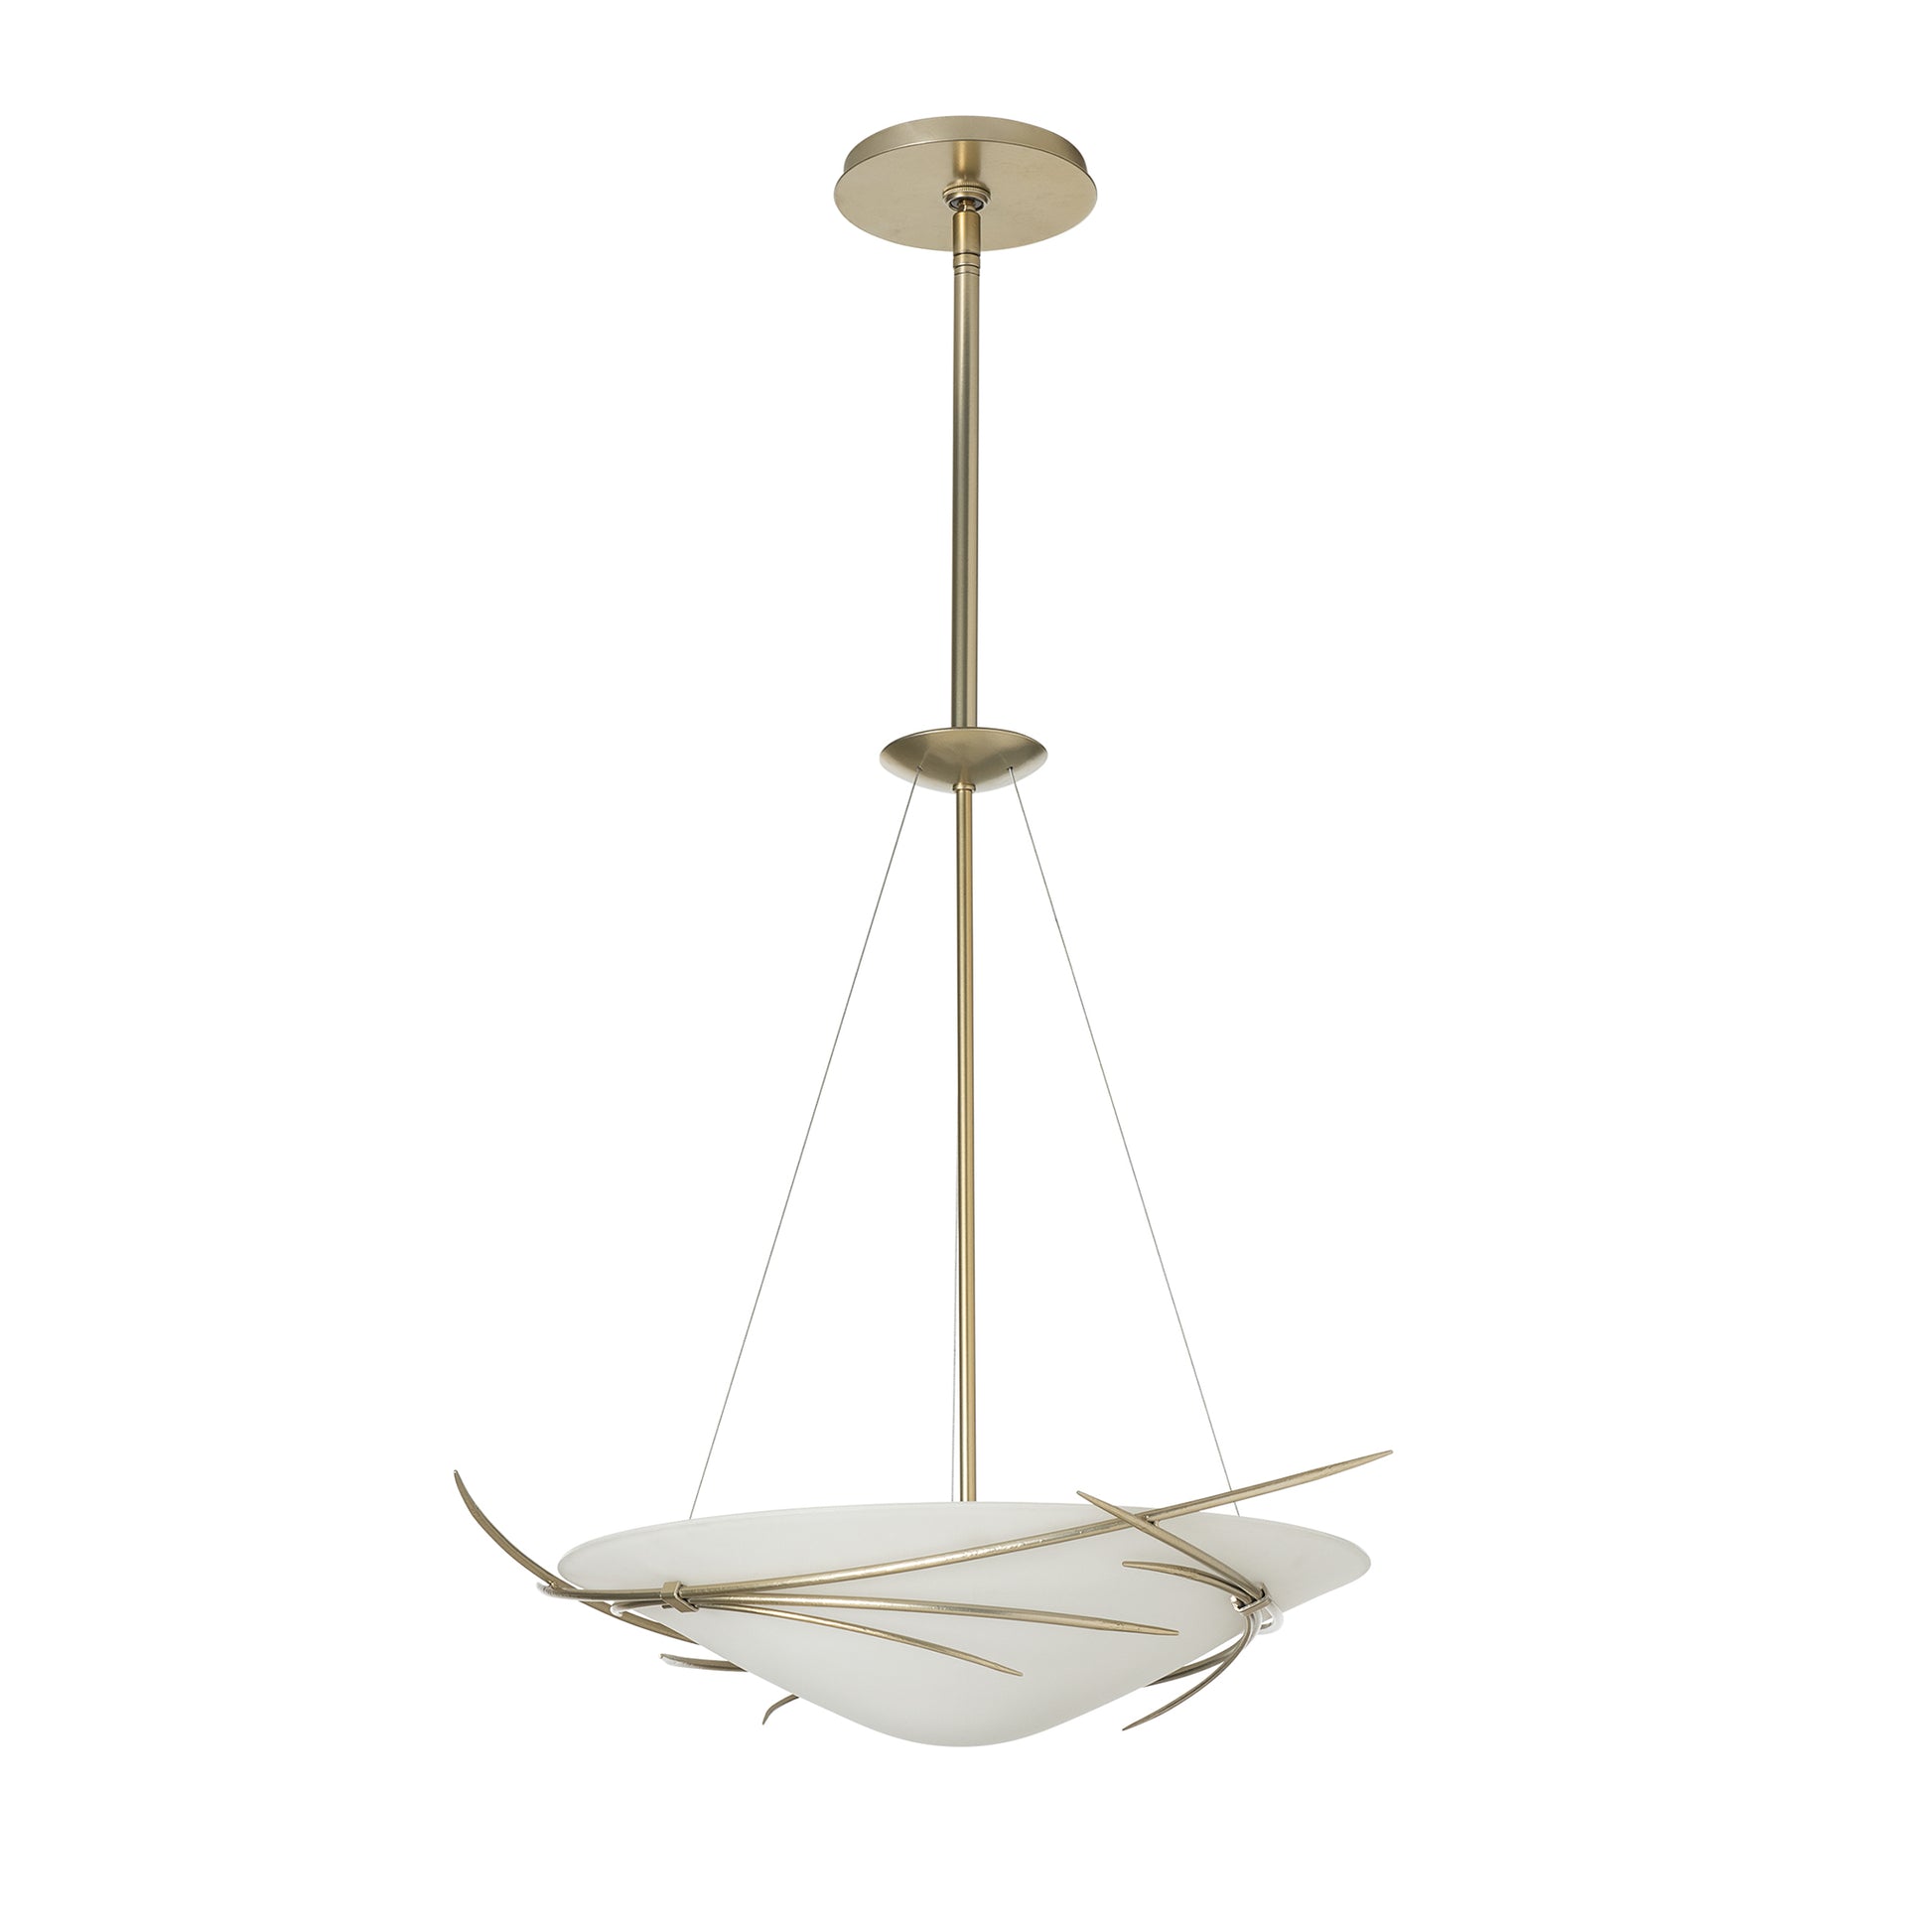 The Hubbardton Forge Wisp Pendant is a stylish light fixture with a glass shade that beautifully complements its brass finish.